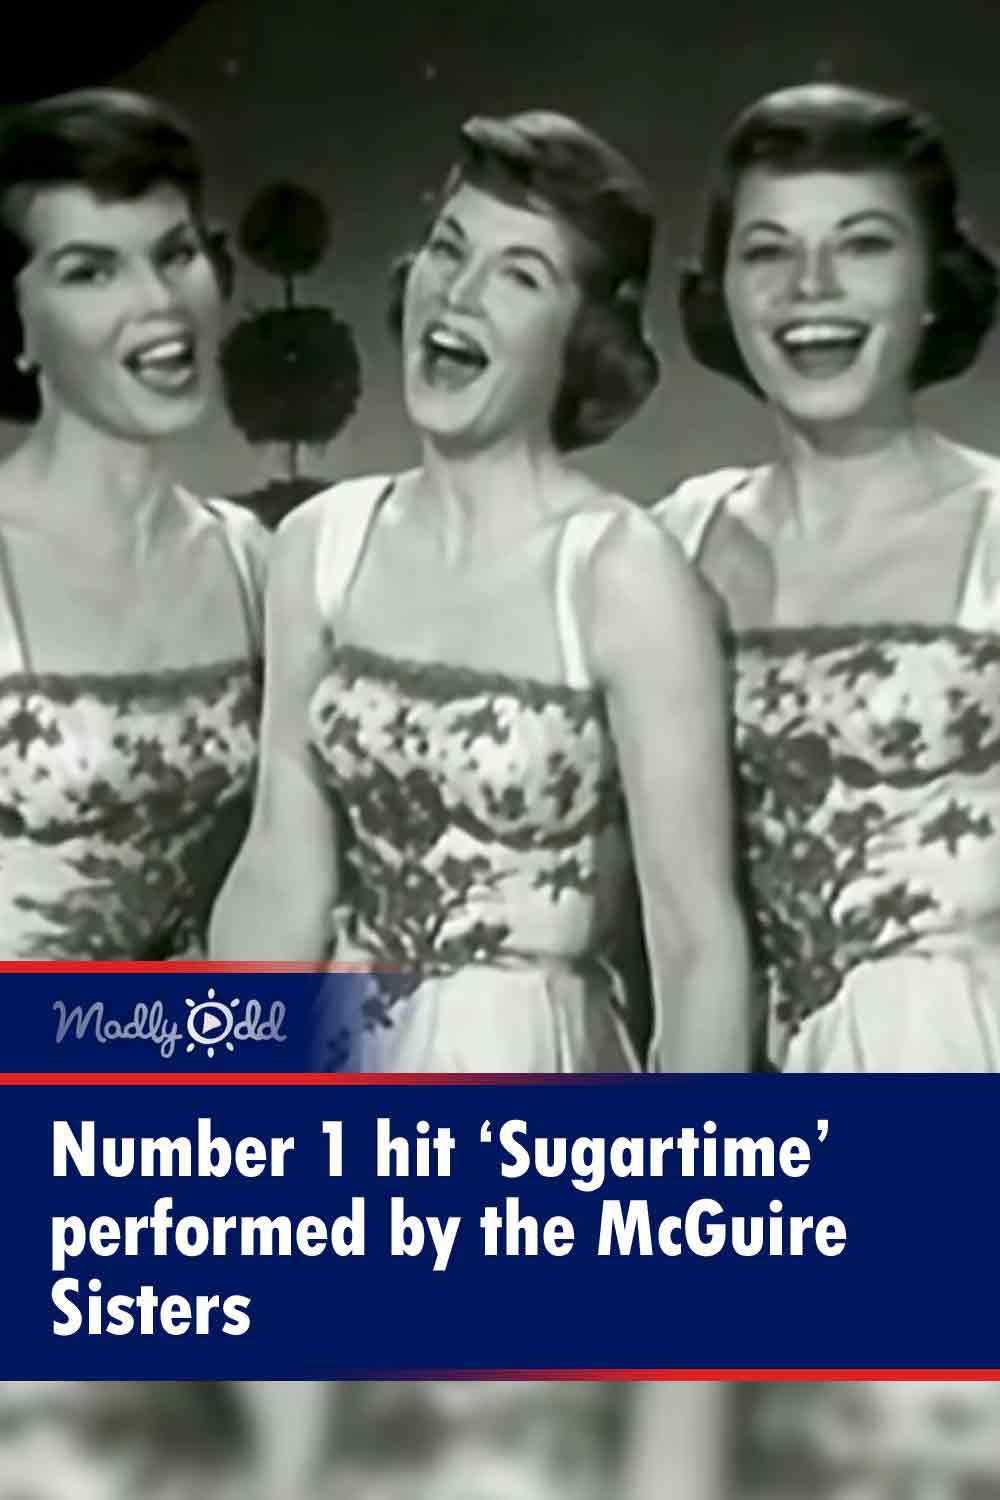 Number 1 hit ‘Sugartime’ performed by the McGuire Sisters